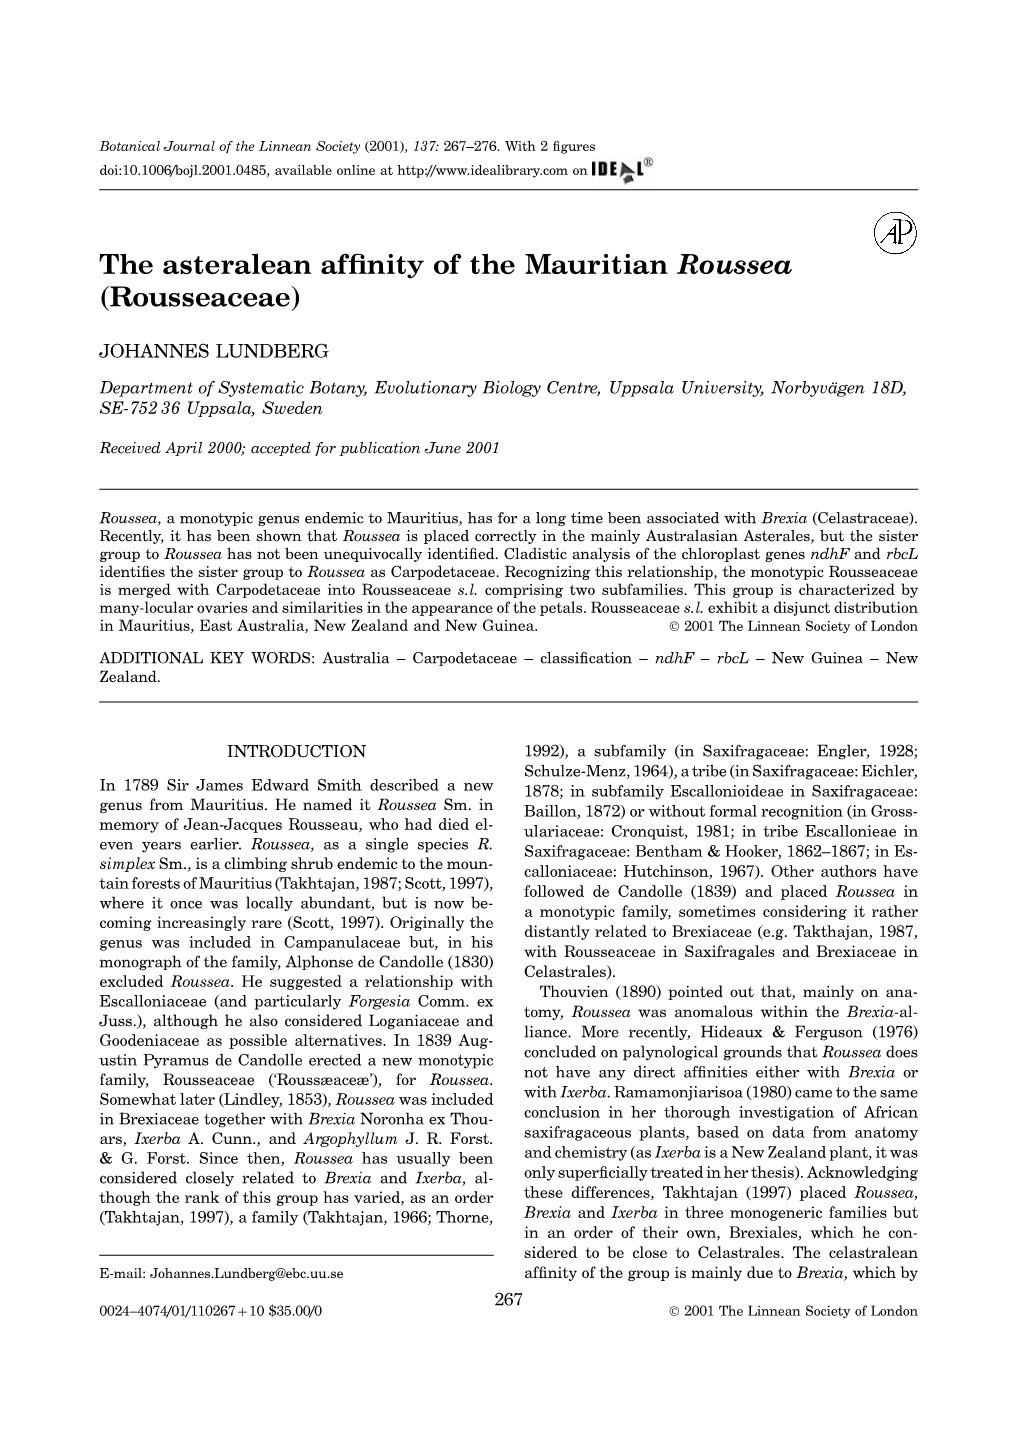 The Asteralean Affinity of the Mauritian Roussea (Rousseaceae)